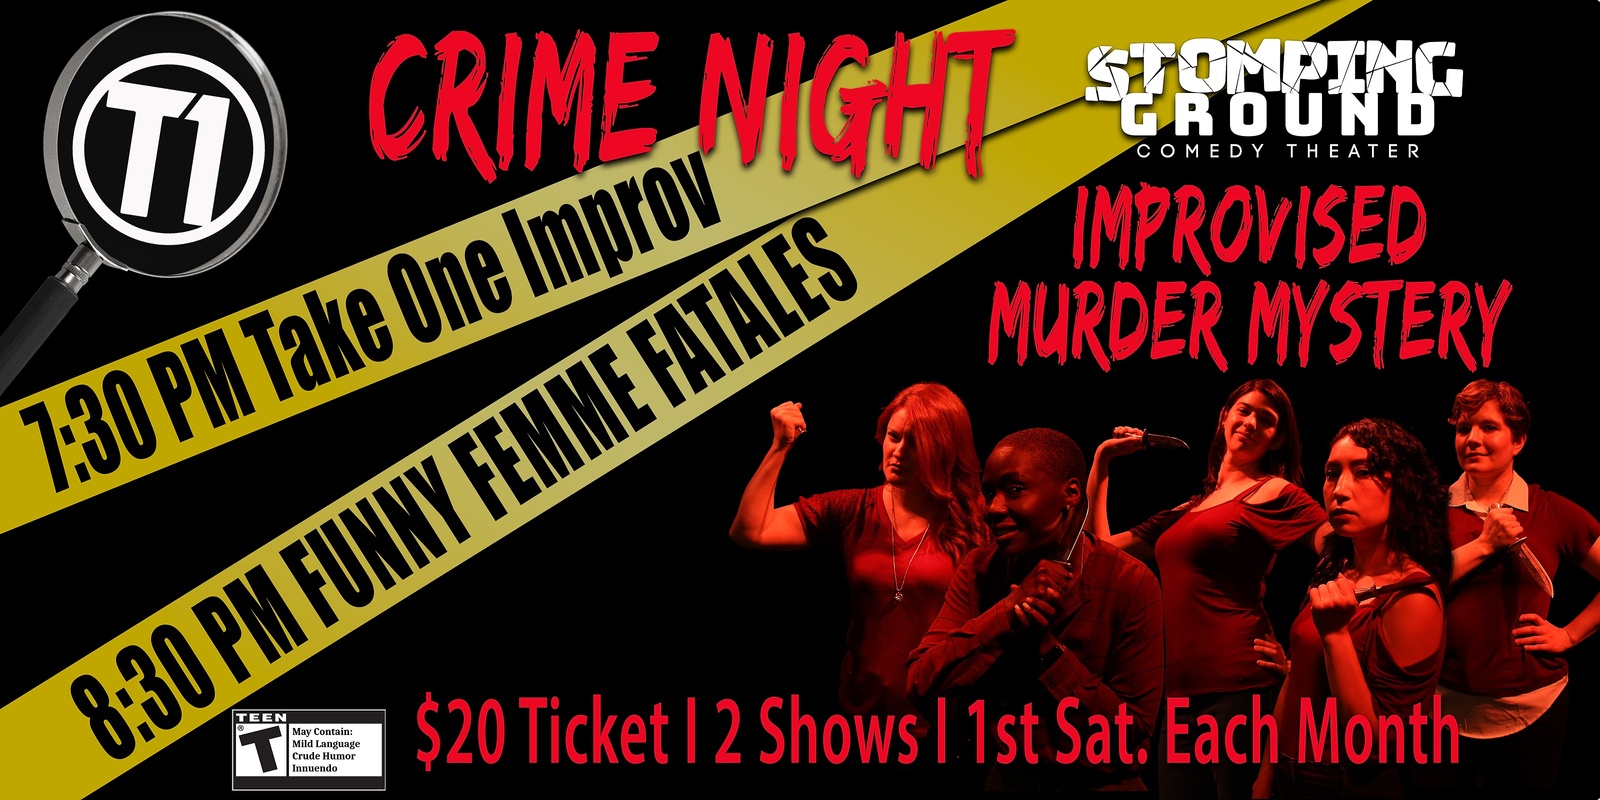 Banner image for Stomping Ground Crime Night